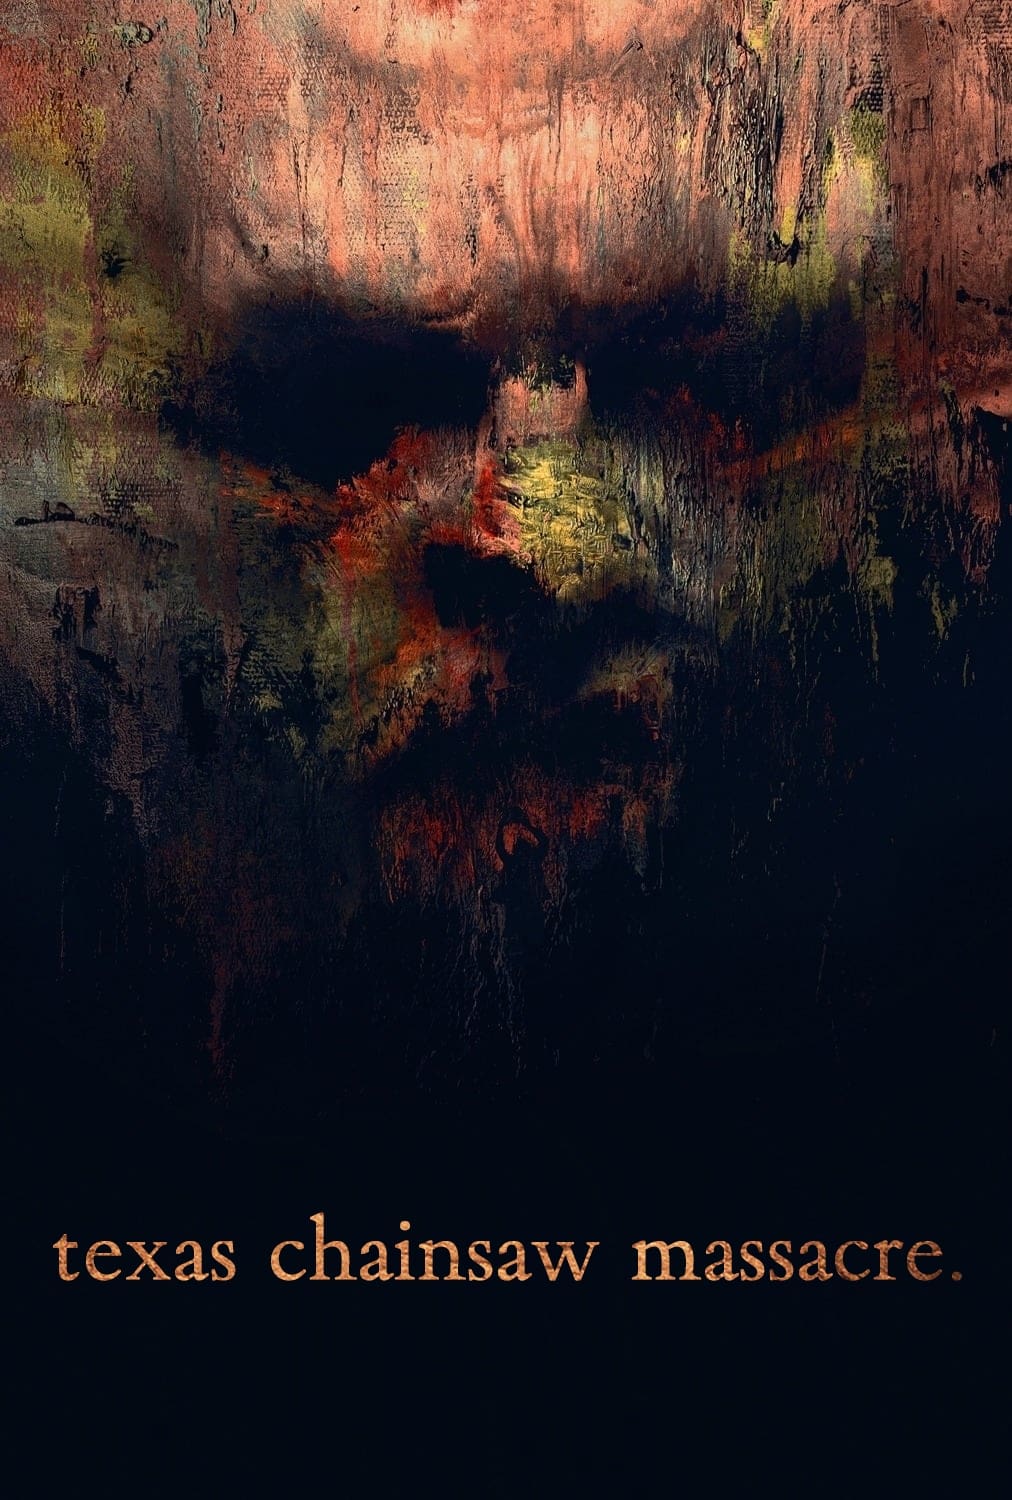 Poster for the movie "Texas Chainsaw Massacre"